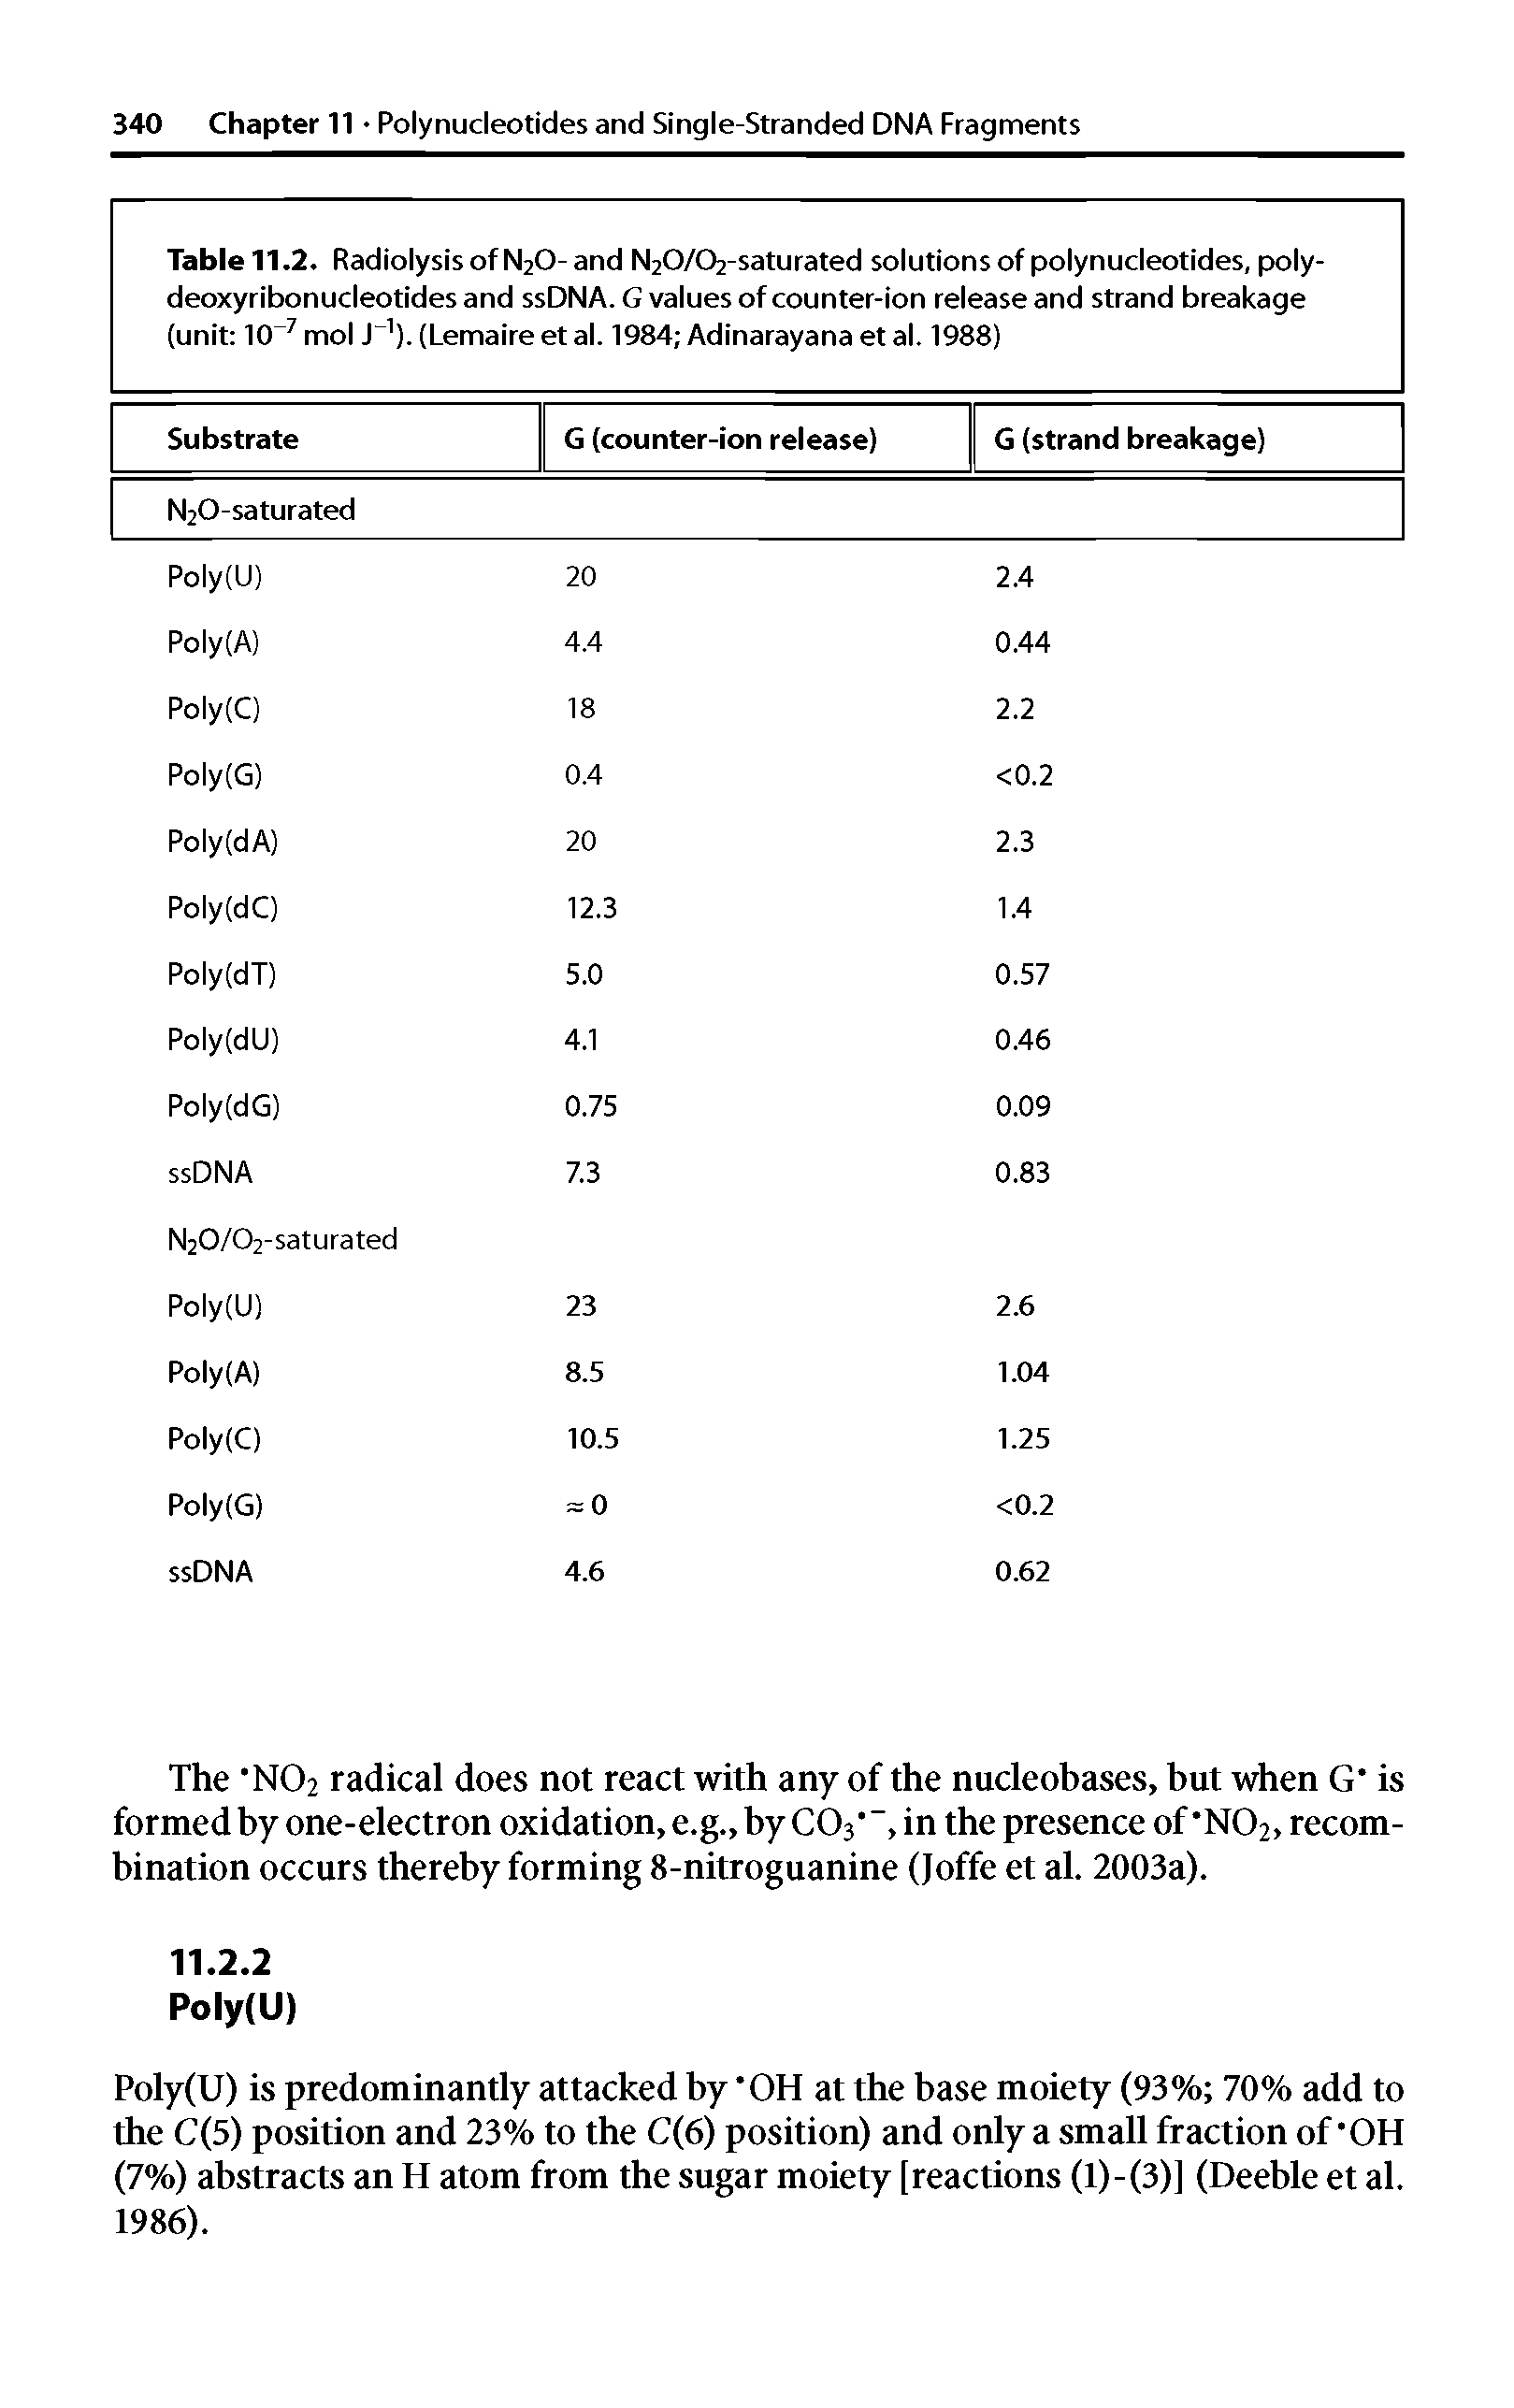 Table 11.2. Radiolysis of N2O-and NjO/Oj-saturated solutions of polynucleotides, poly-deoxyribonucleotides and ssDNA. G values of counter-ion release and strand breakage (unit 10 7 mol J ). (Lemaire et al. 1984 Adinarayana et al. 1988) ...